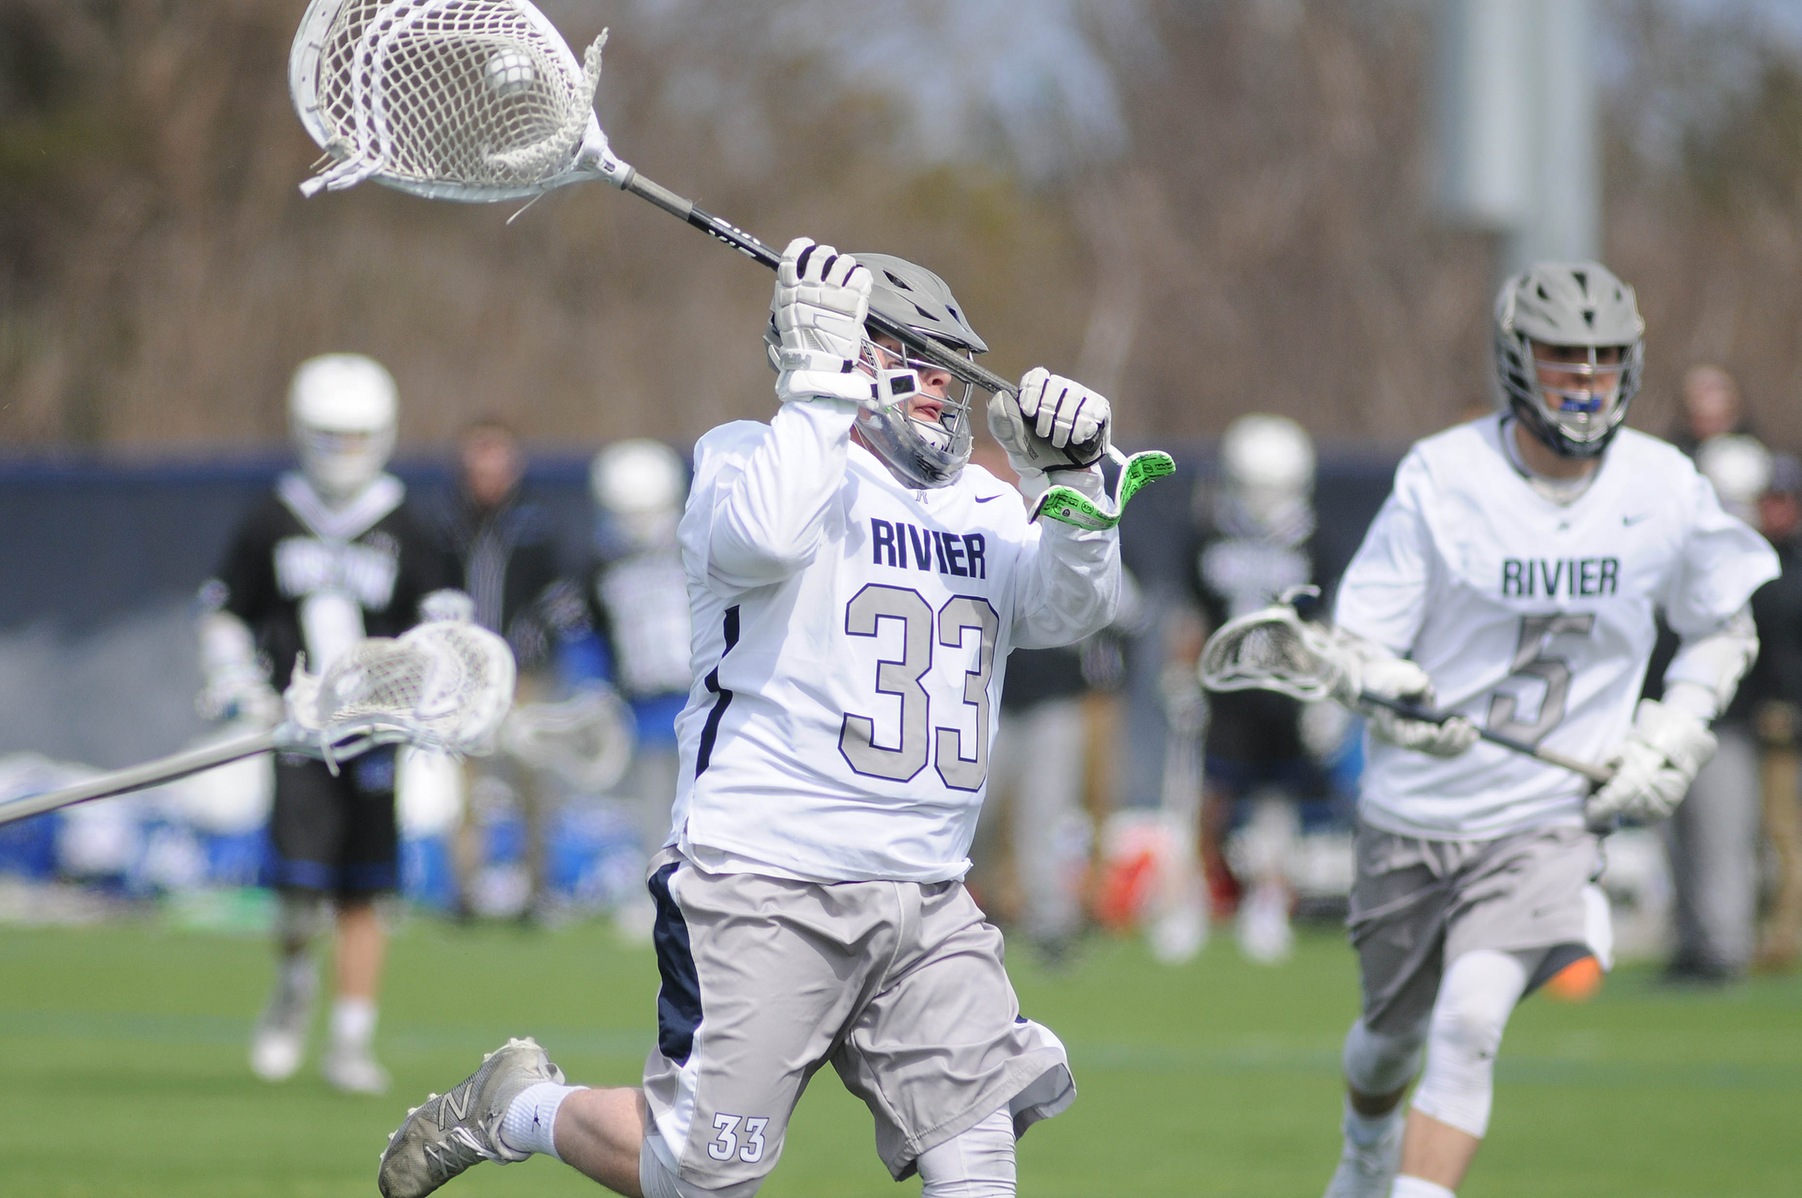 Men's Lacrosse: Raiders tripped up at home by UMass-Boston